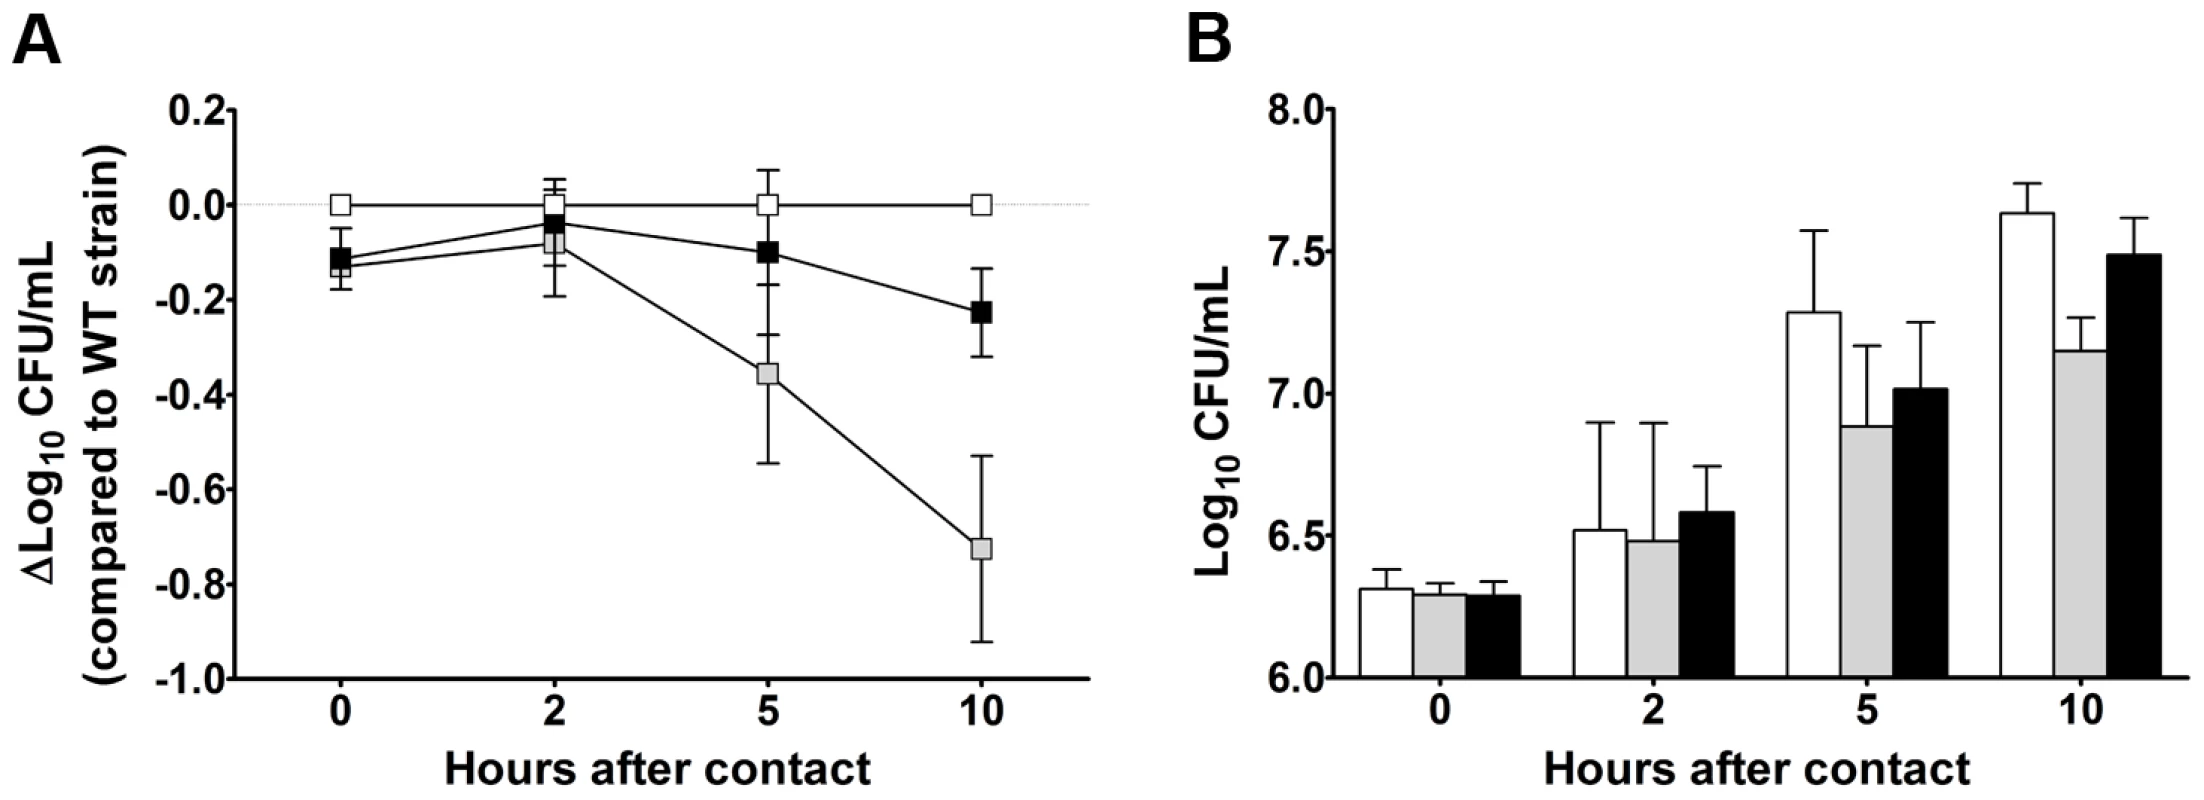 YPMT1.66c is required for intracellular survival in macrophages (A) and for optimal growth in serum (B).